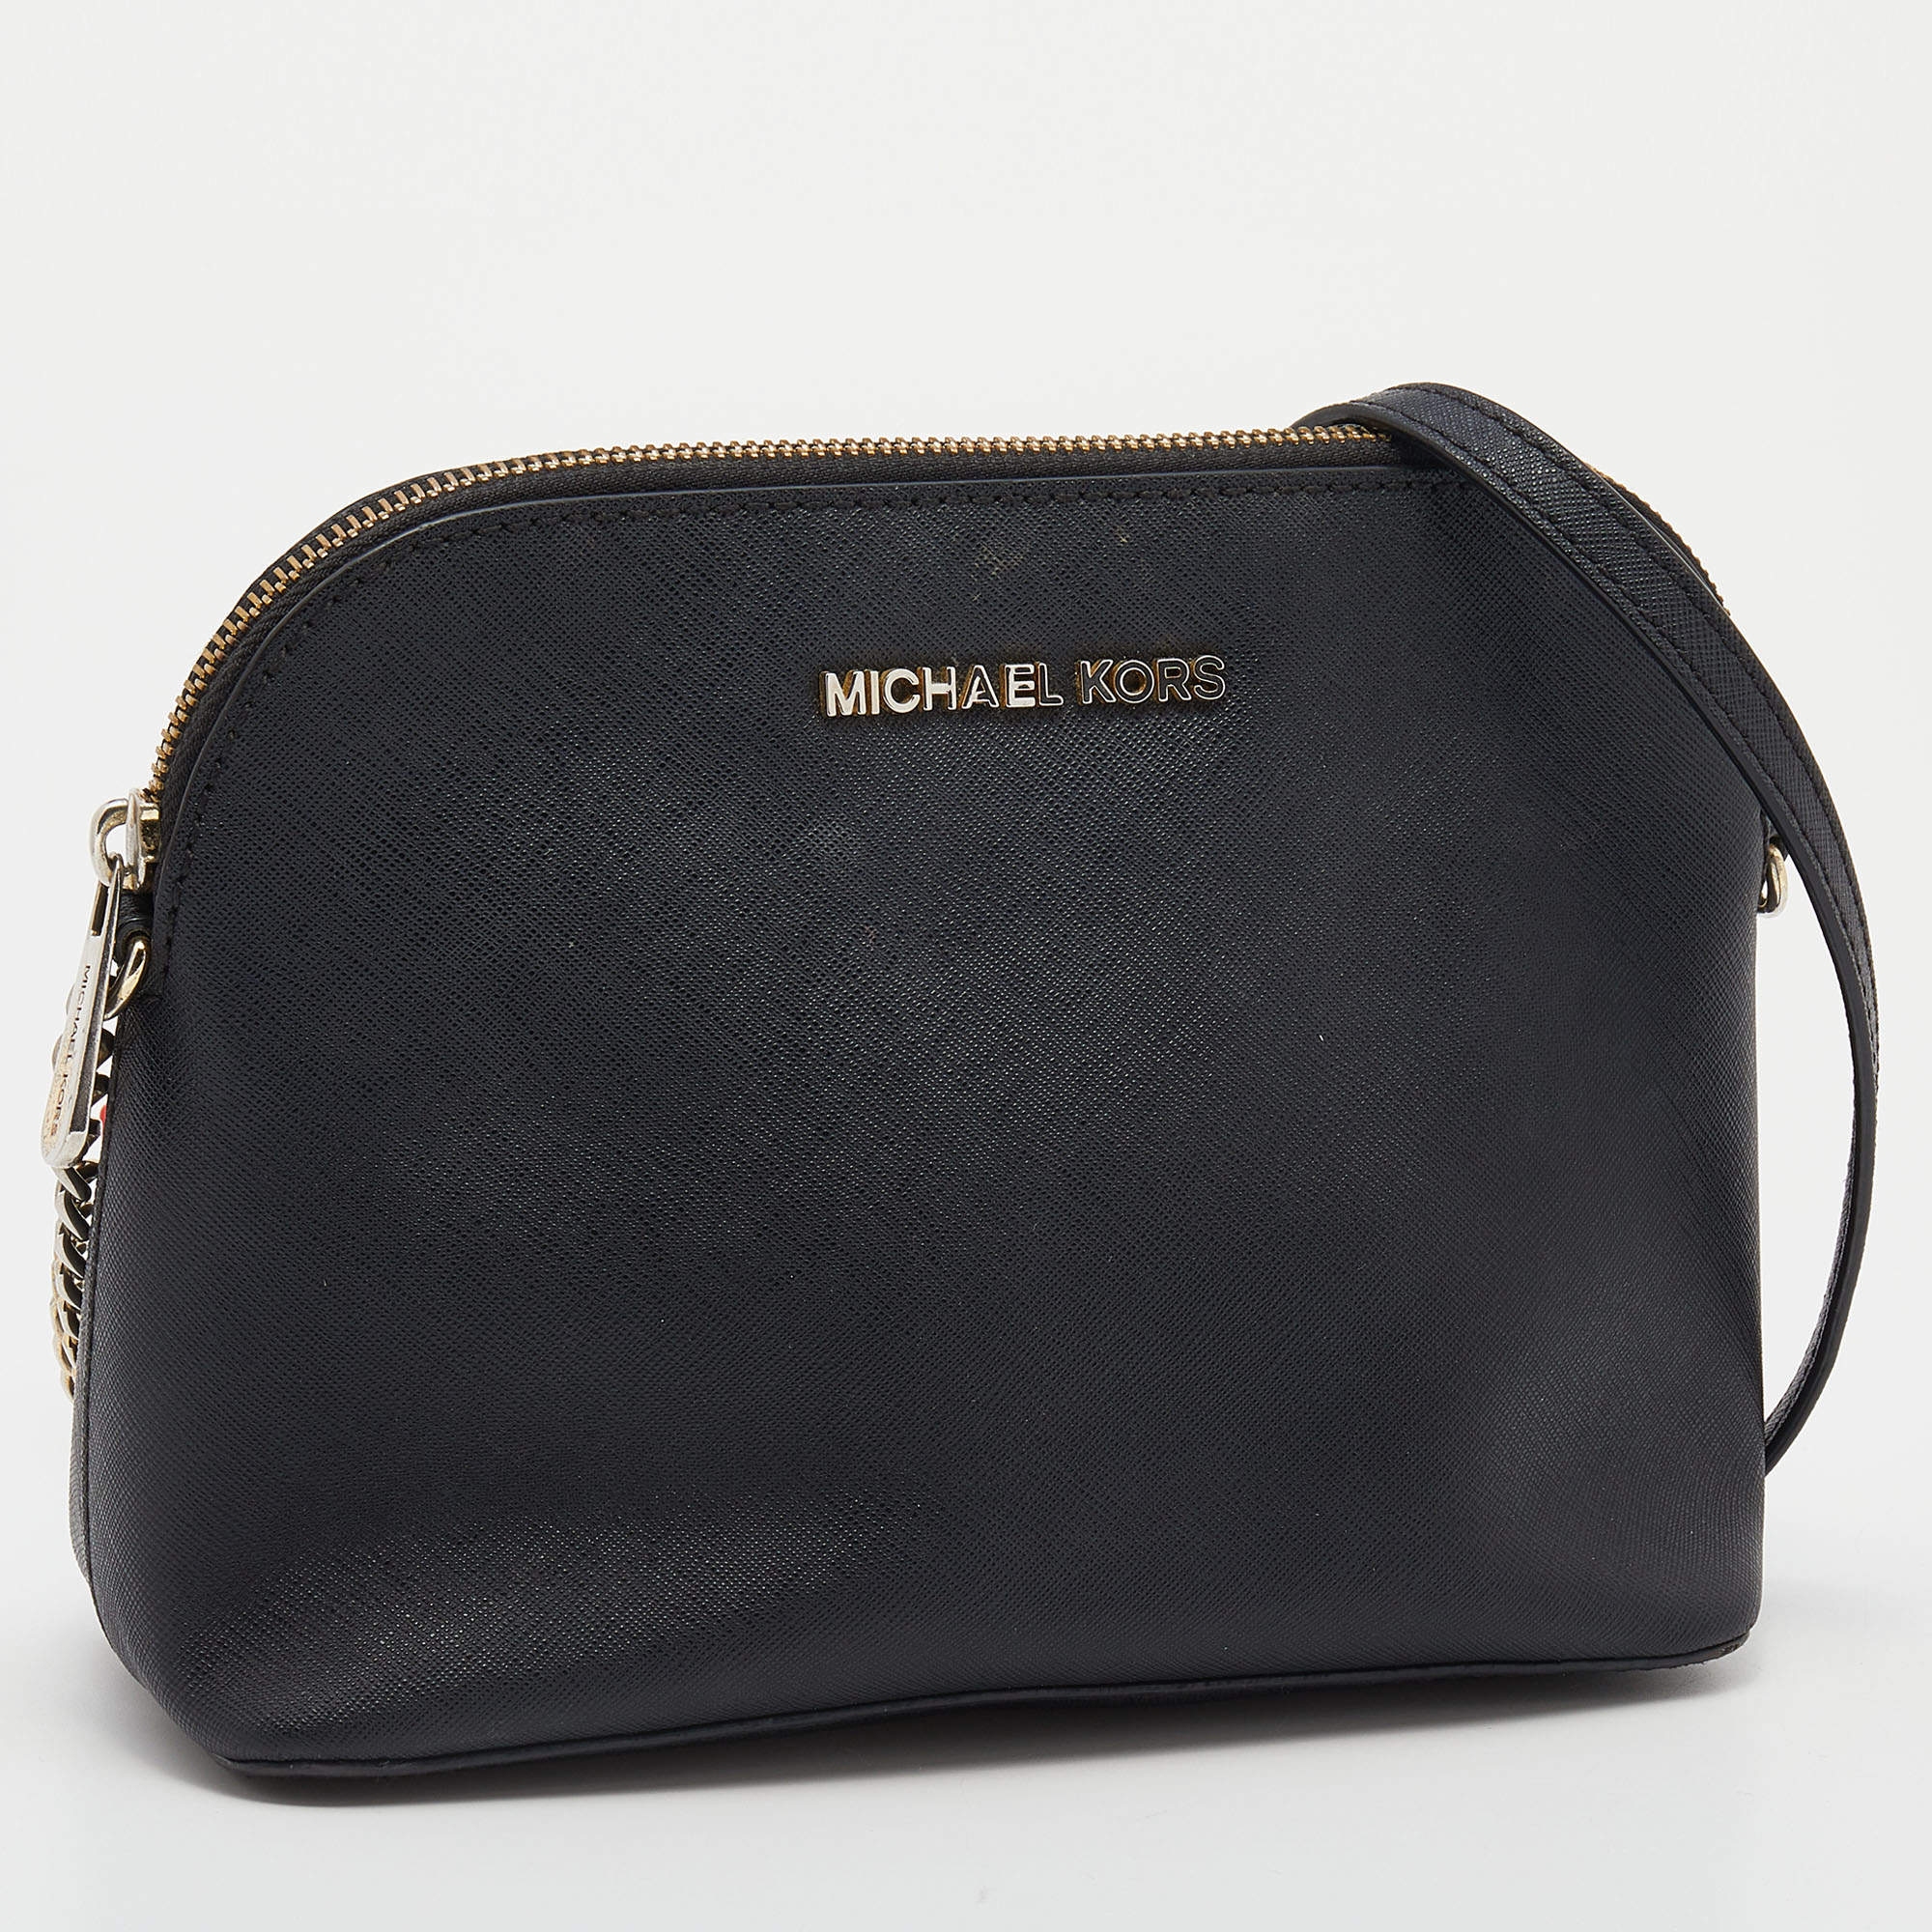 New With Tags Michael Kors VIOLET Cindy Dome Crossbody Bag